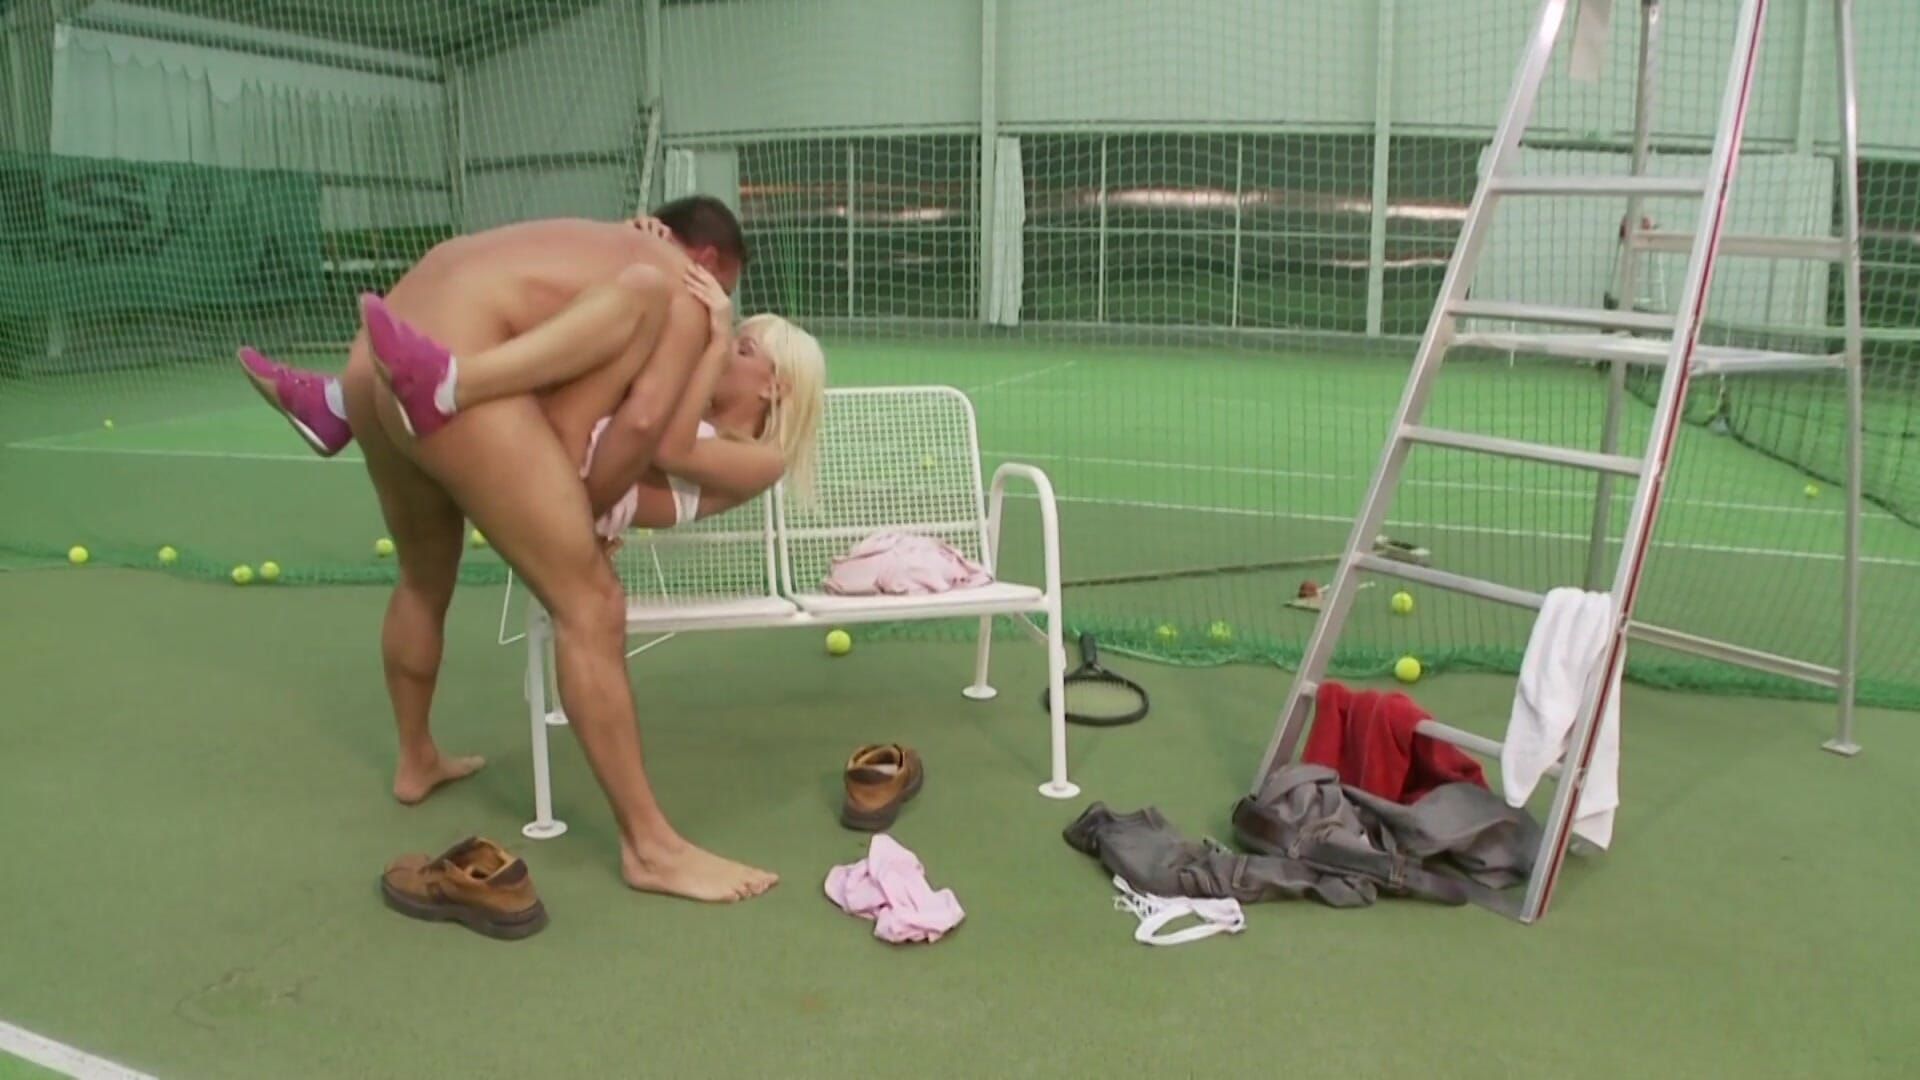 CUTE CHICKS. Pretty horny blonde getting her ass fucked on the tennis court by her coach--SEXUAL SIN